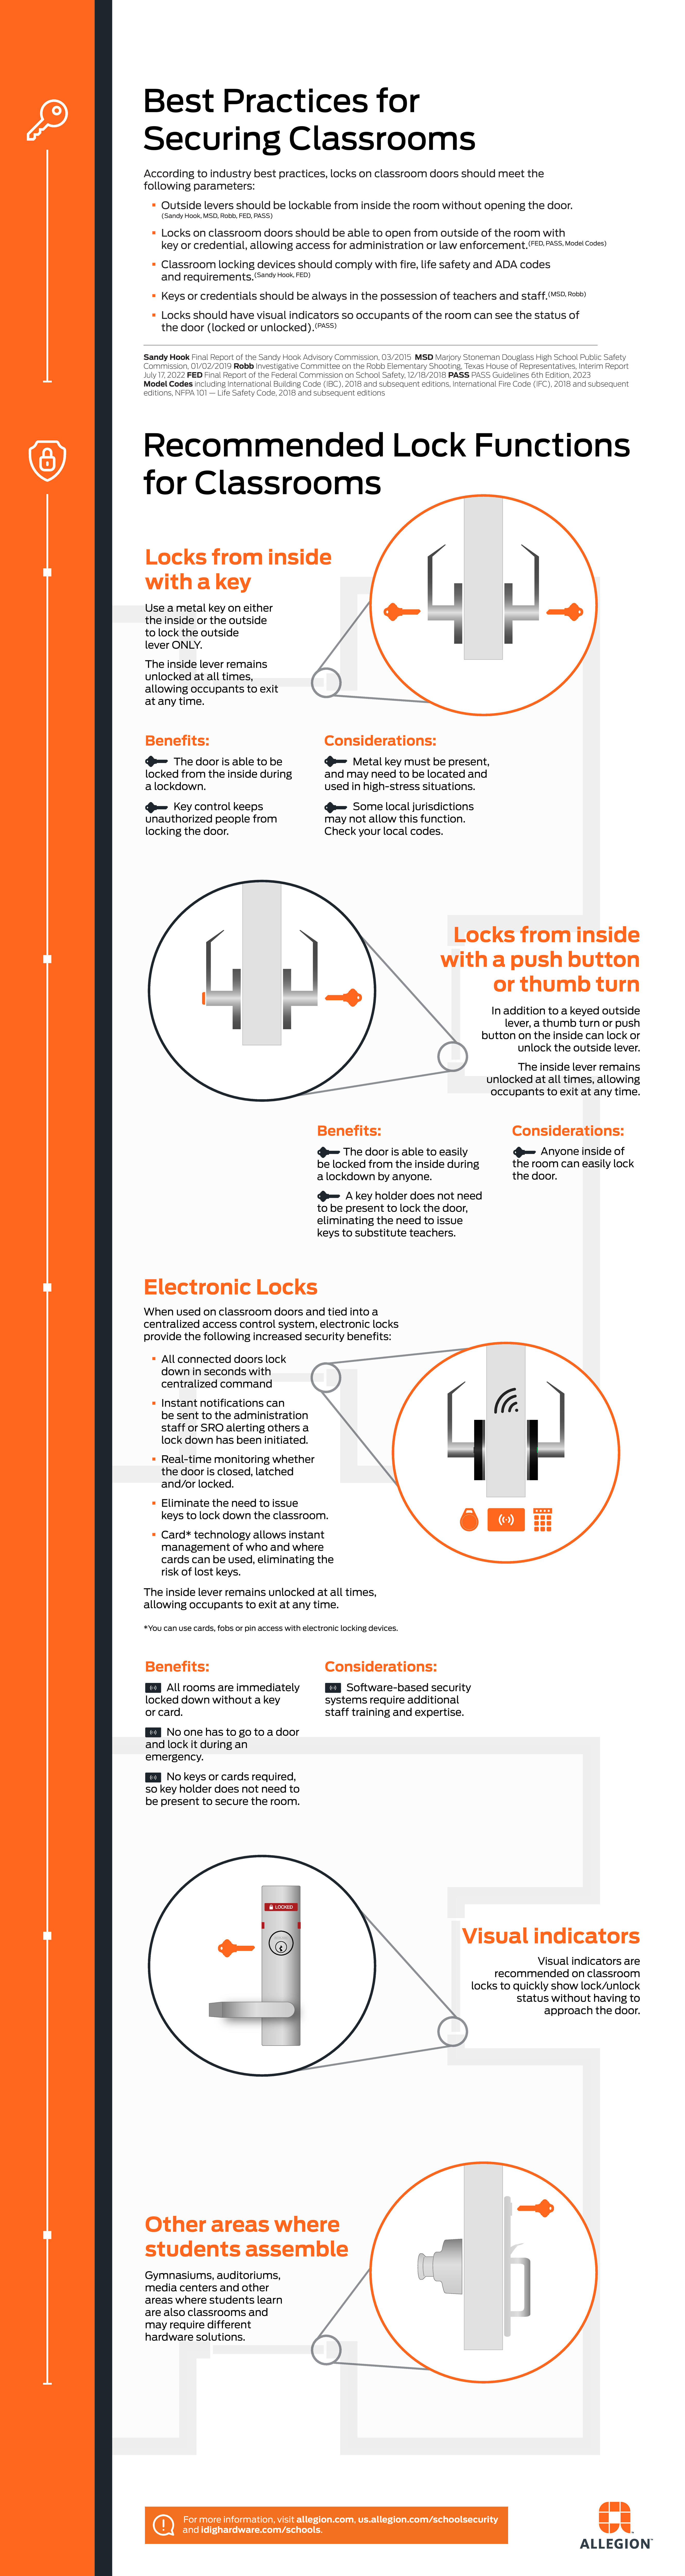 Best practice for securing classroom infographic